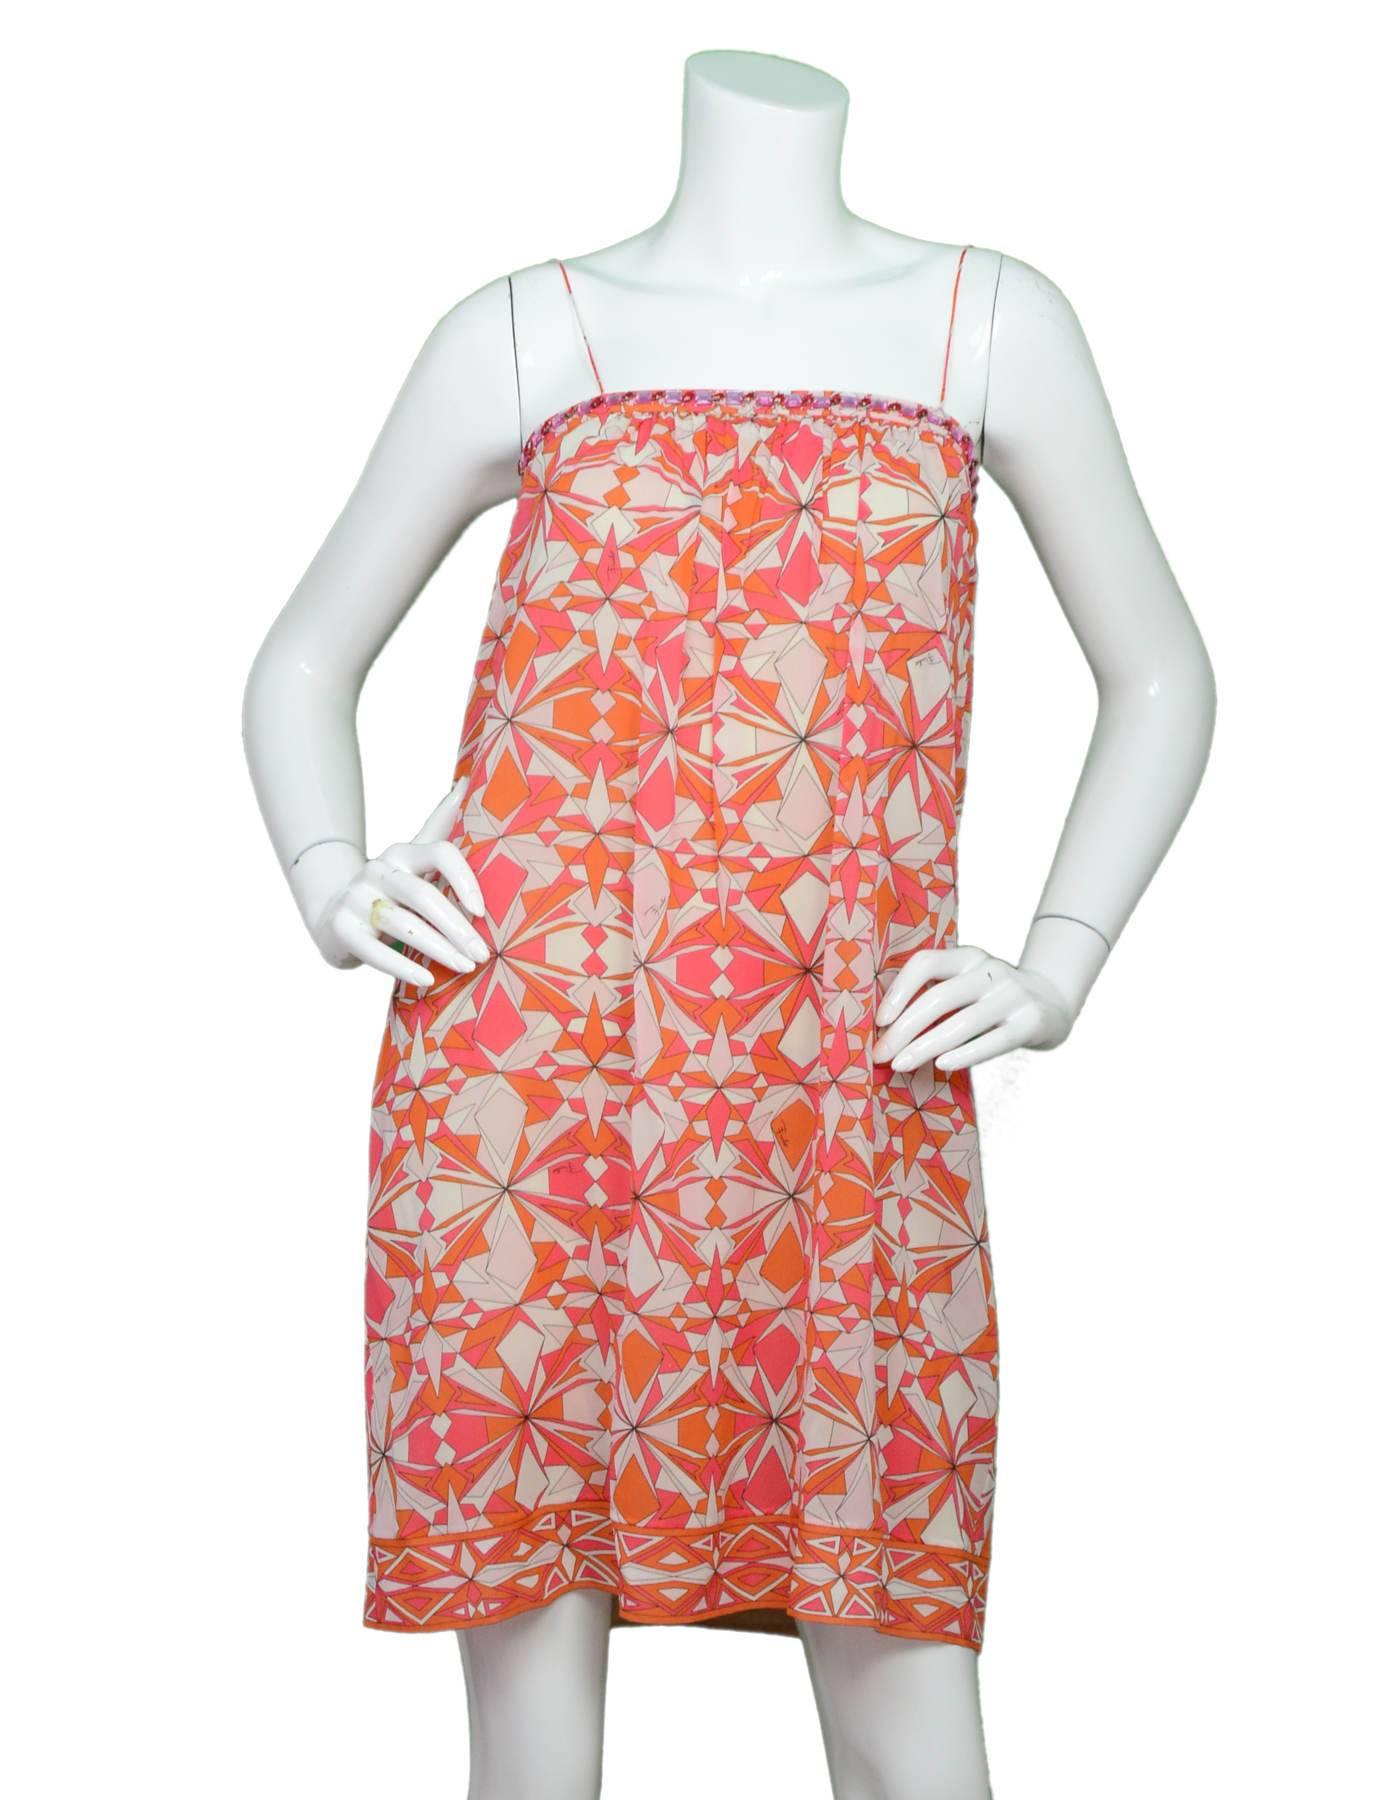 Emilio Pucci Silk Orange Print Dress Sz 4

Features beading at bust and spaghetti straps

Made In: Italy
Color: Orange, white
Composition: 92% Silk, 8% elastane
Lining: Nude slip
Closure/Opening: Stretch bust
Overall Condition: Excellent pre-owned